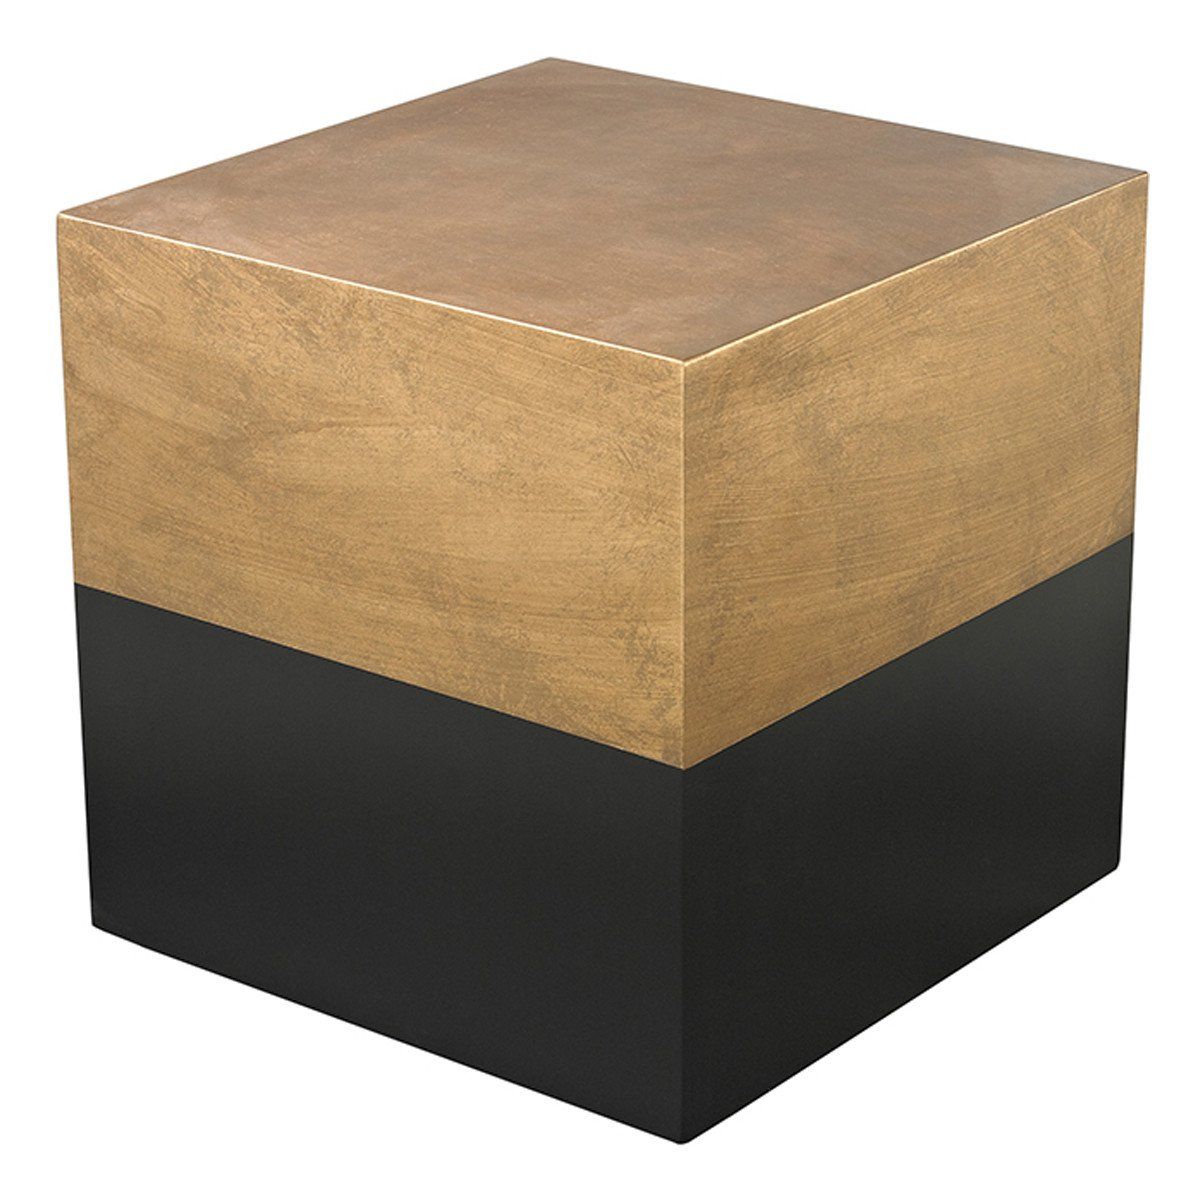 black and gold draper cube table products uttermost gin accent mosaic patio clearance very garden furniture brass hairpin legs grey green paint cherry occasional tables ethan